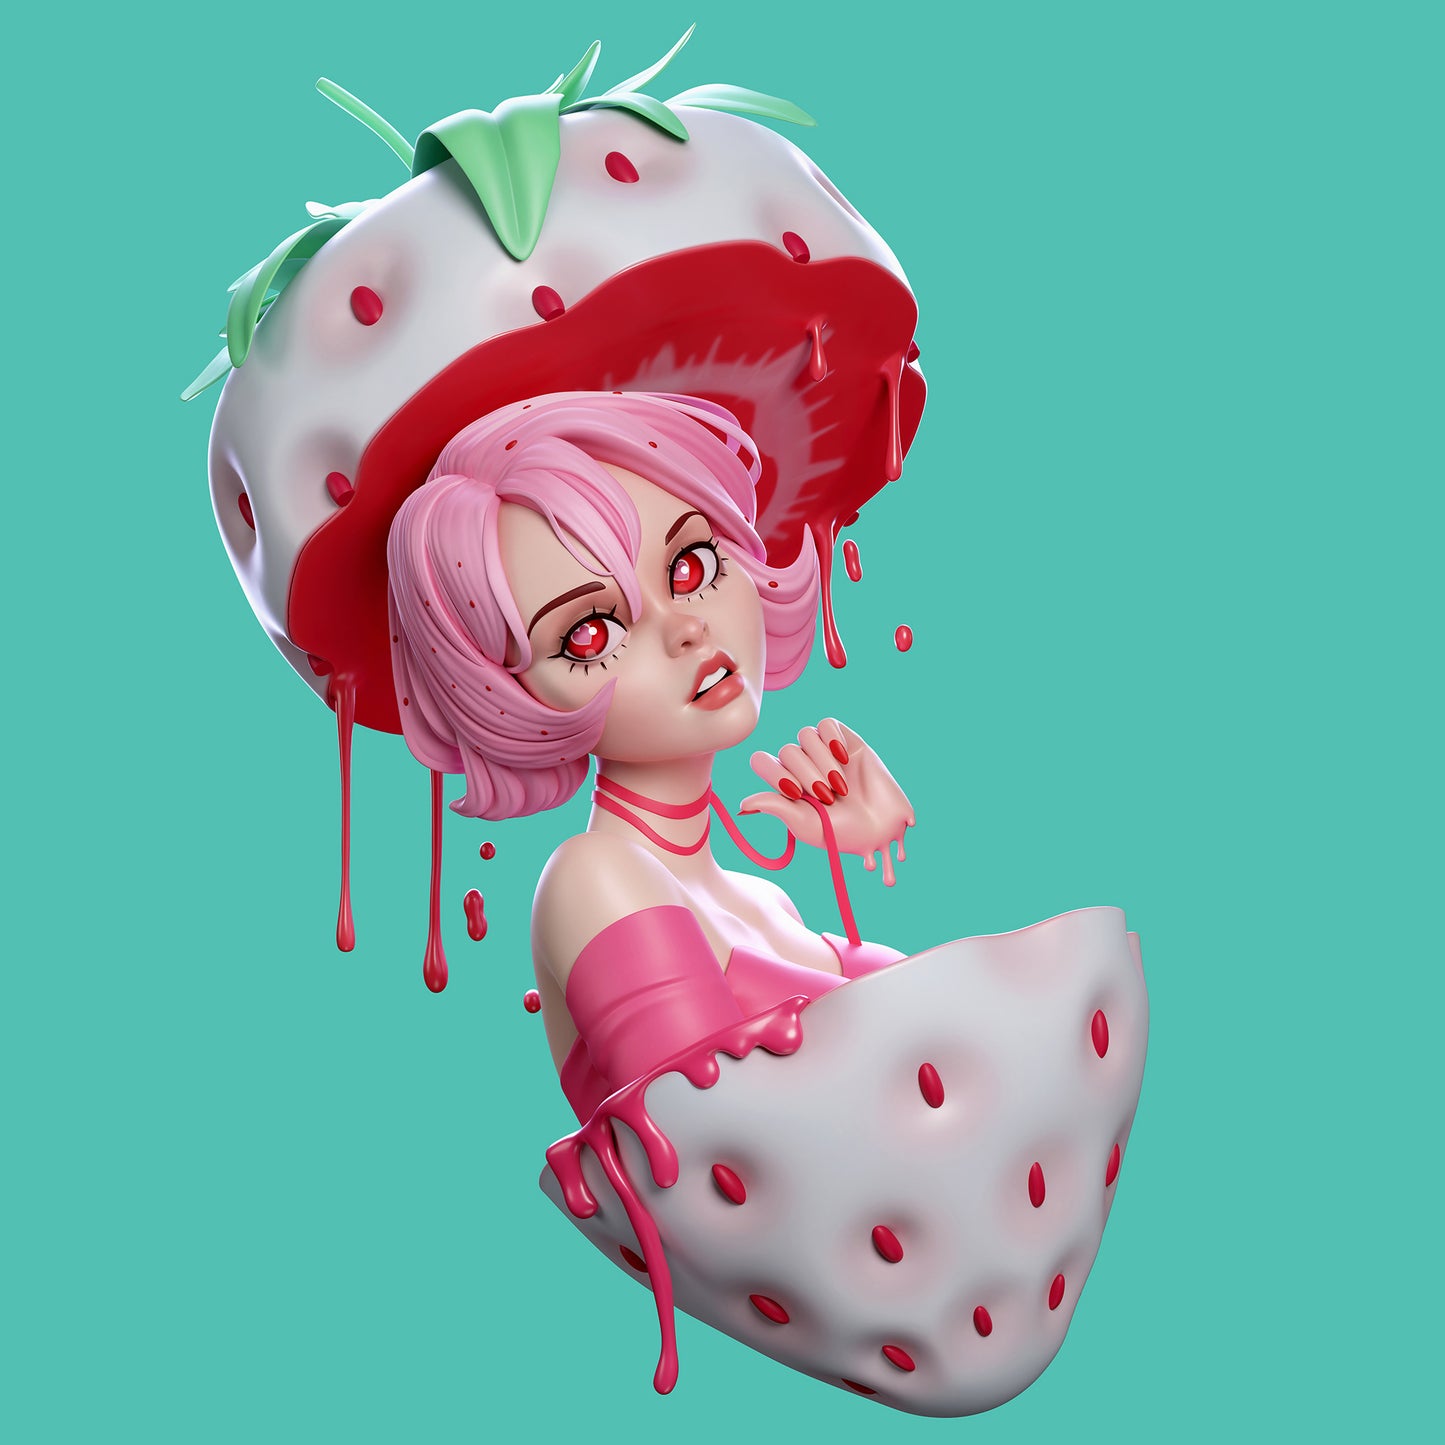 Pineberry Girl In-Depth Tutorial + Project Files